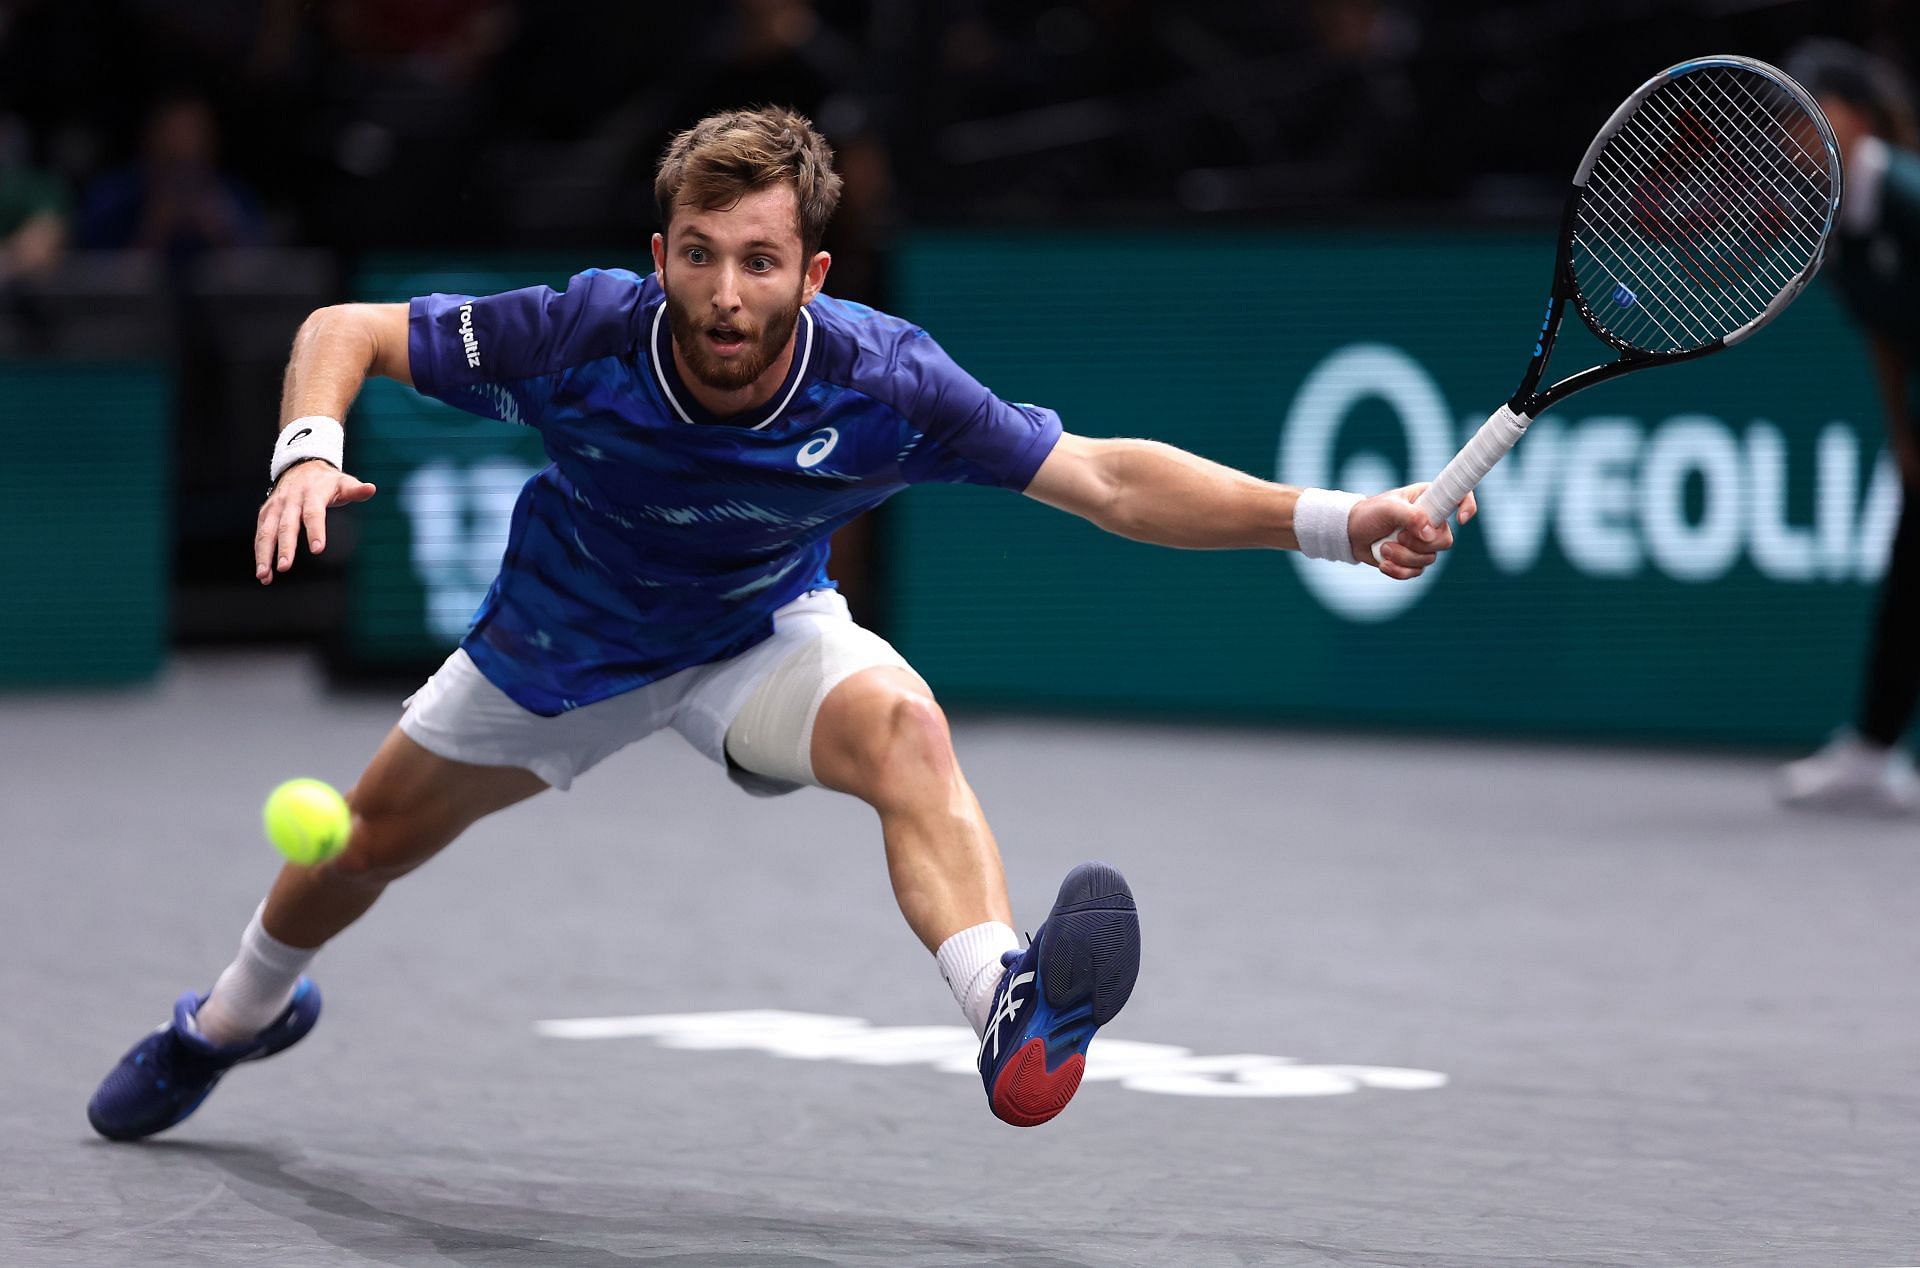 Cameron Norrie at the Rolex Paris Masters - Day Three